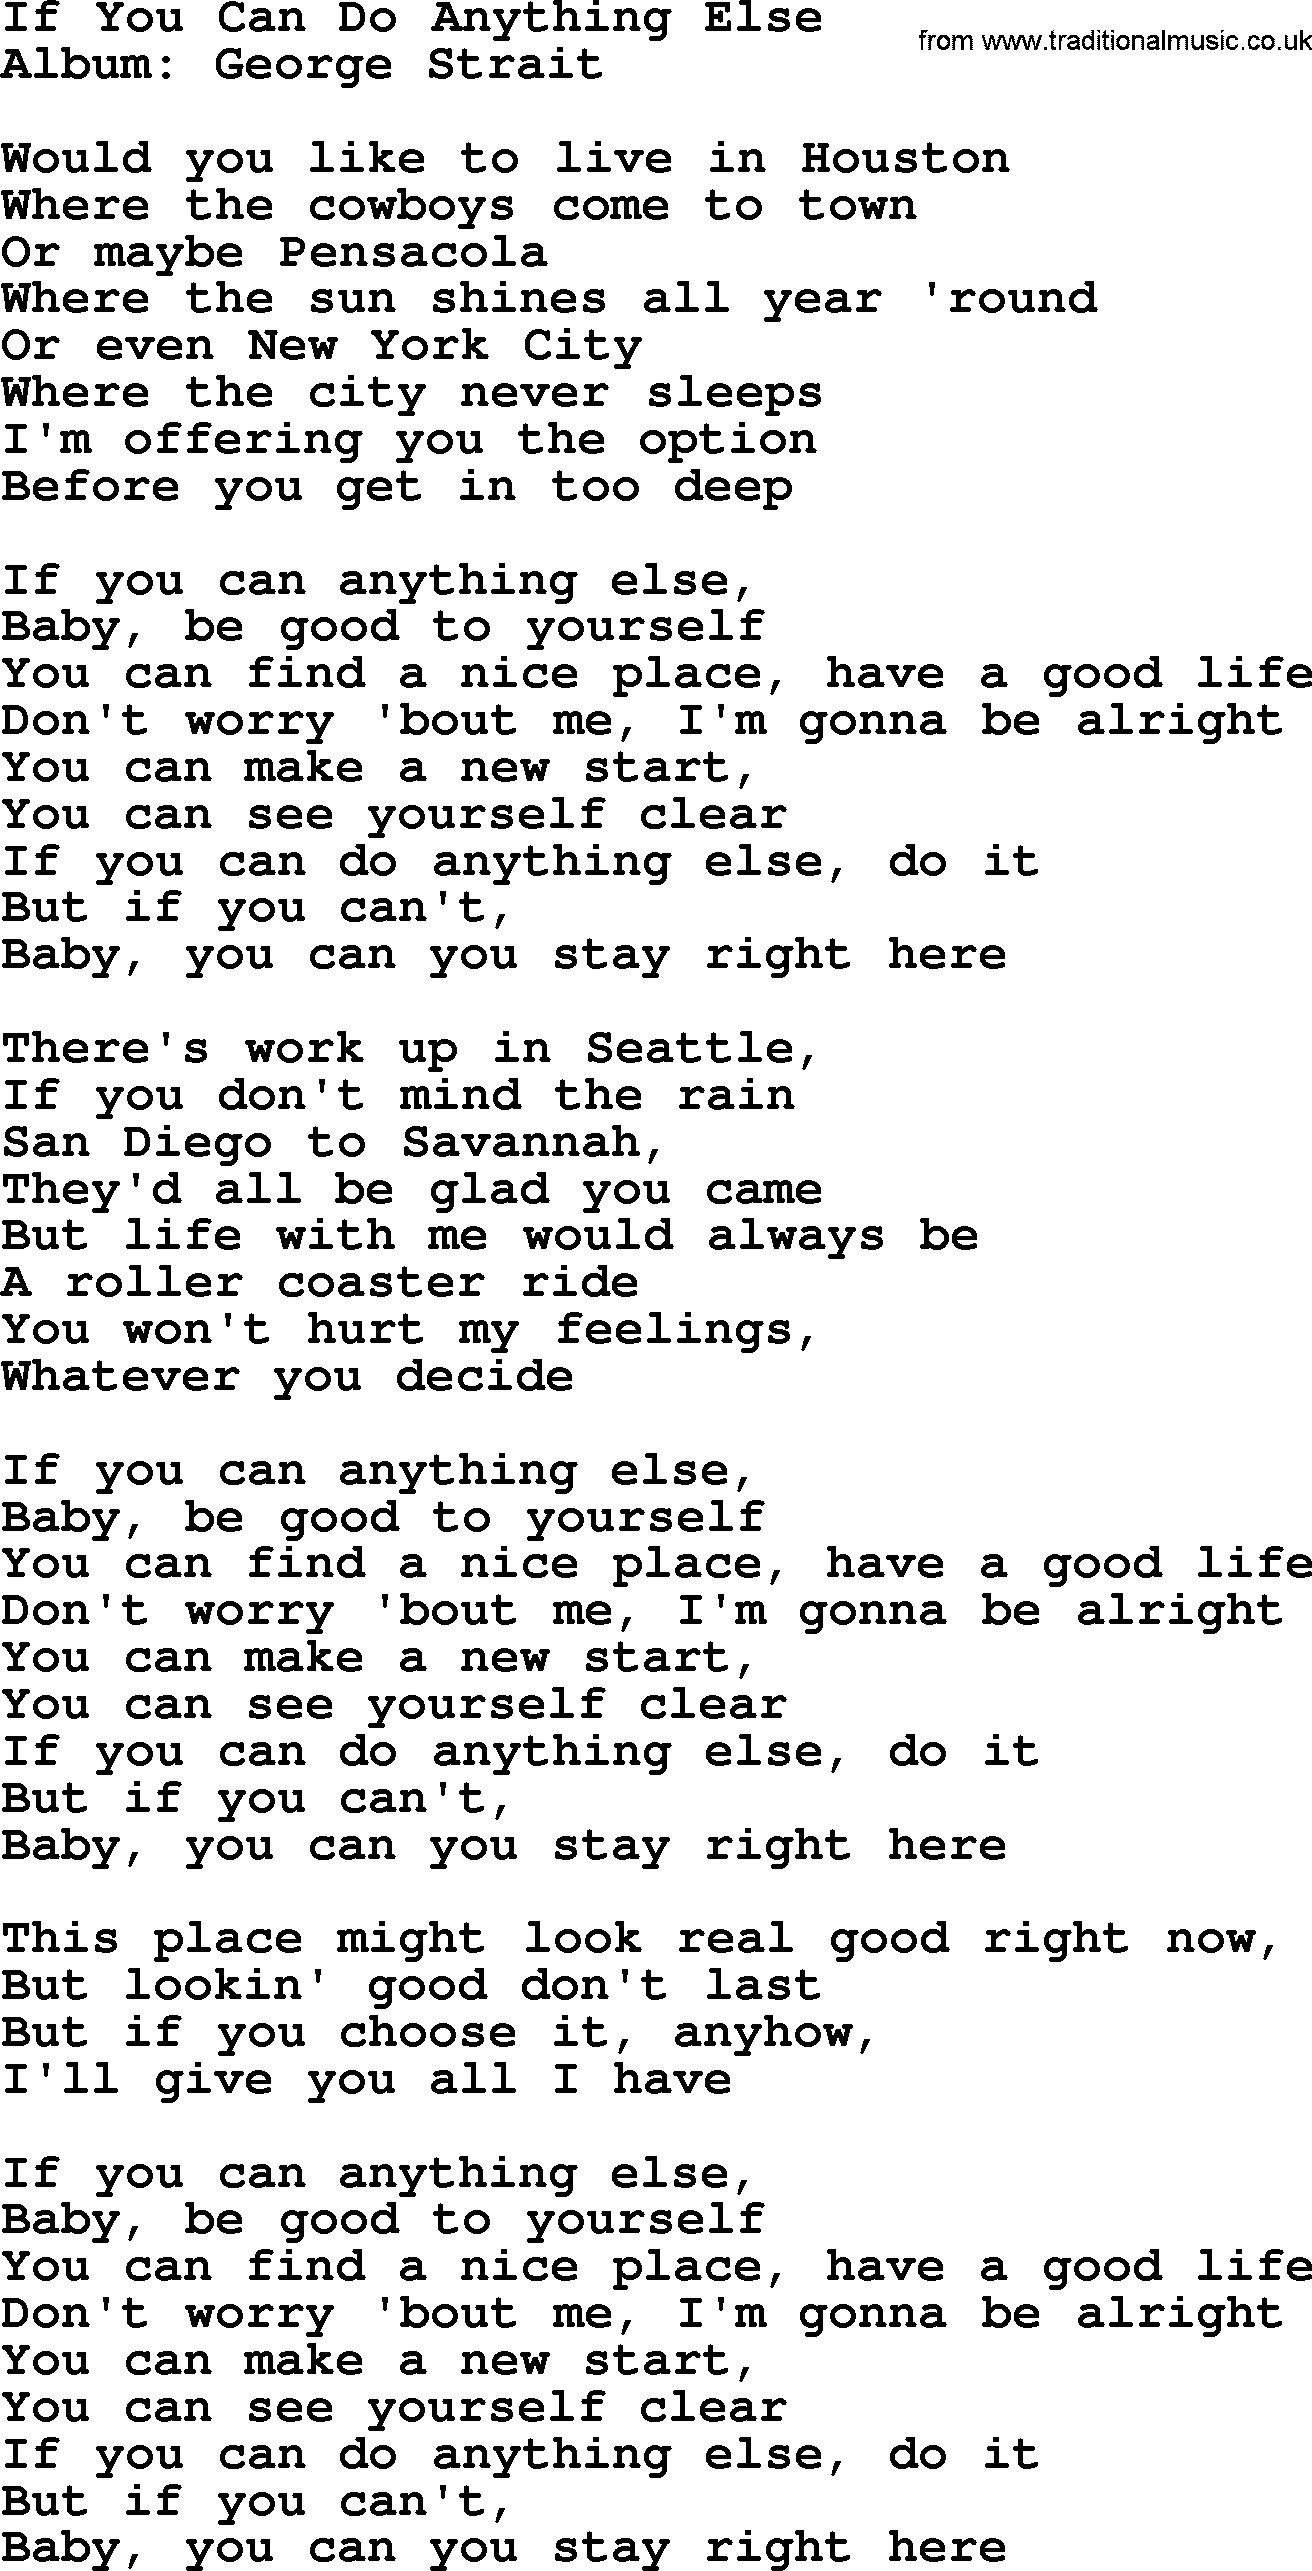 George Strait song: If You Can Do Anything Else, lyrics